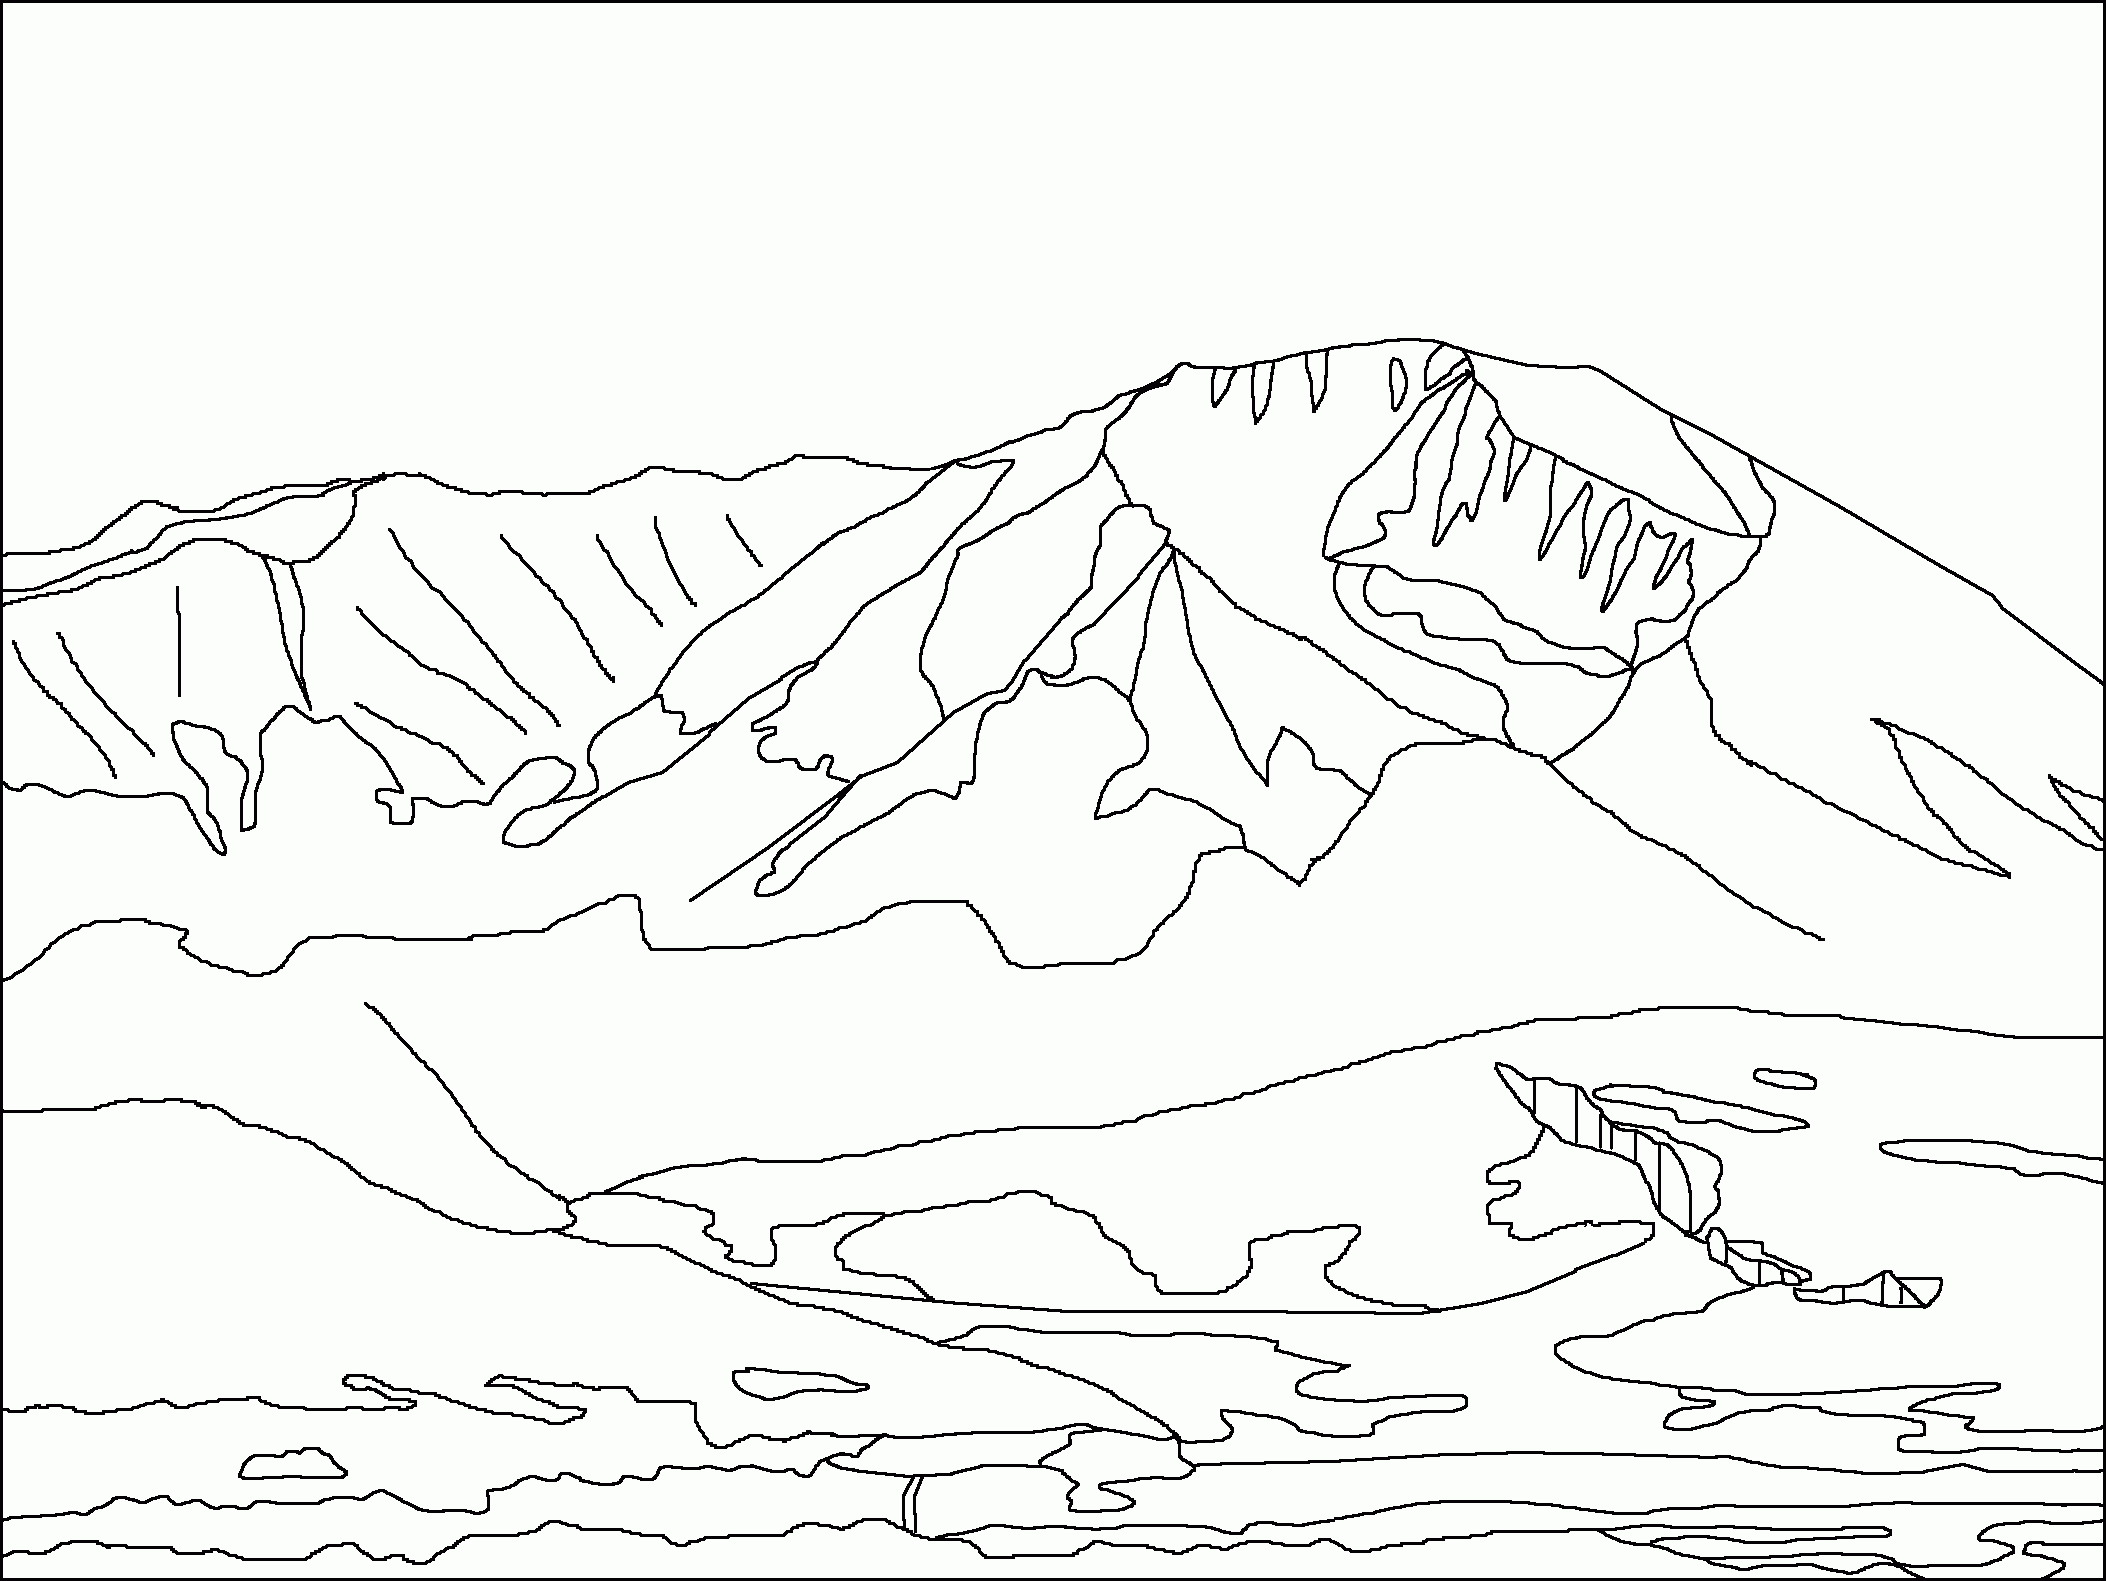 Coloring Pages Mountains - Coloring Page Photos - Coloring Home